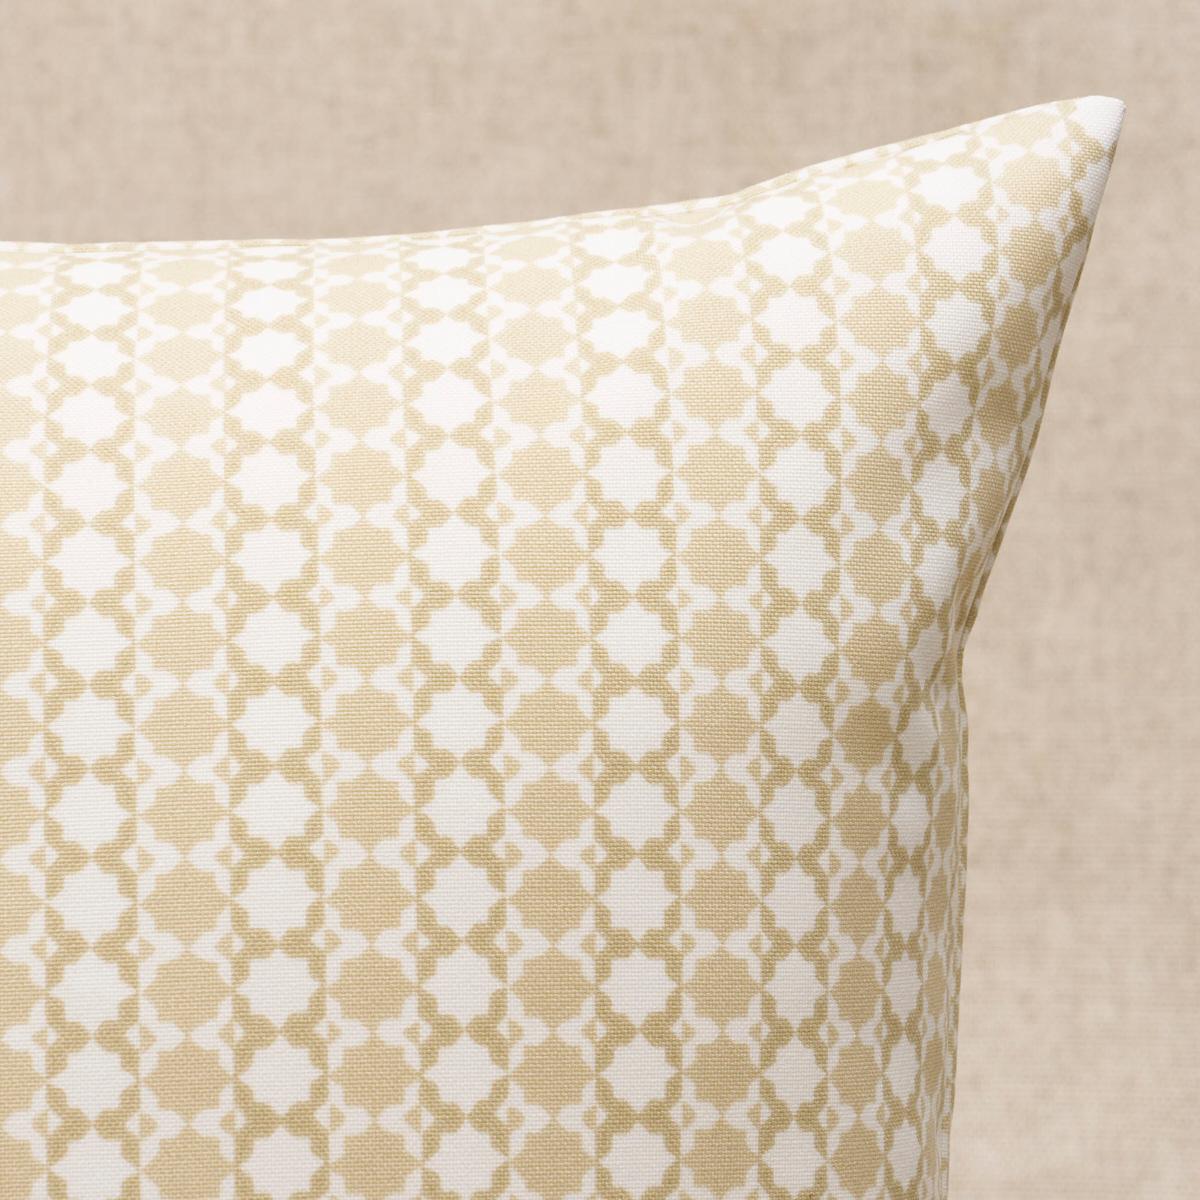 This pillow features Posy Indoor/Outdoor by Mark D. Sikeswith a knife edge finish. Inspired by traditional Moroccan tiles, Posy Indoor/Outdoor in neutral by Mark D. Sikes is a stylish high-performance fabric that can stand up to the elements. Pillow